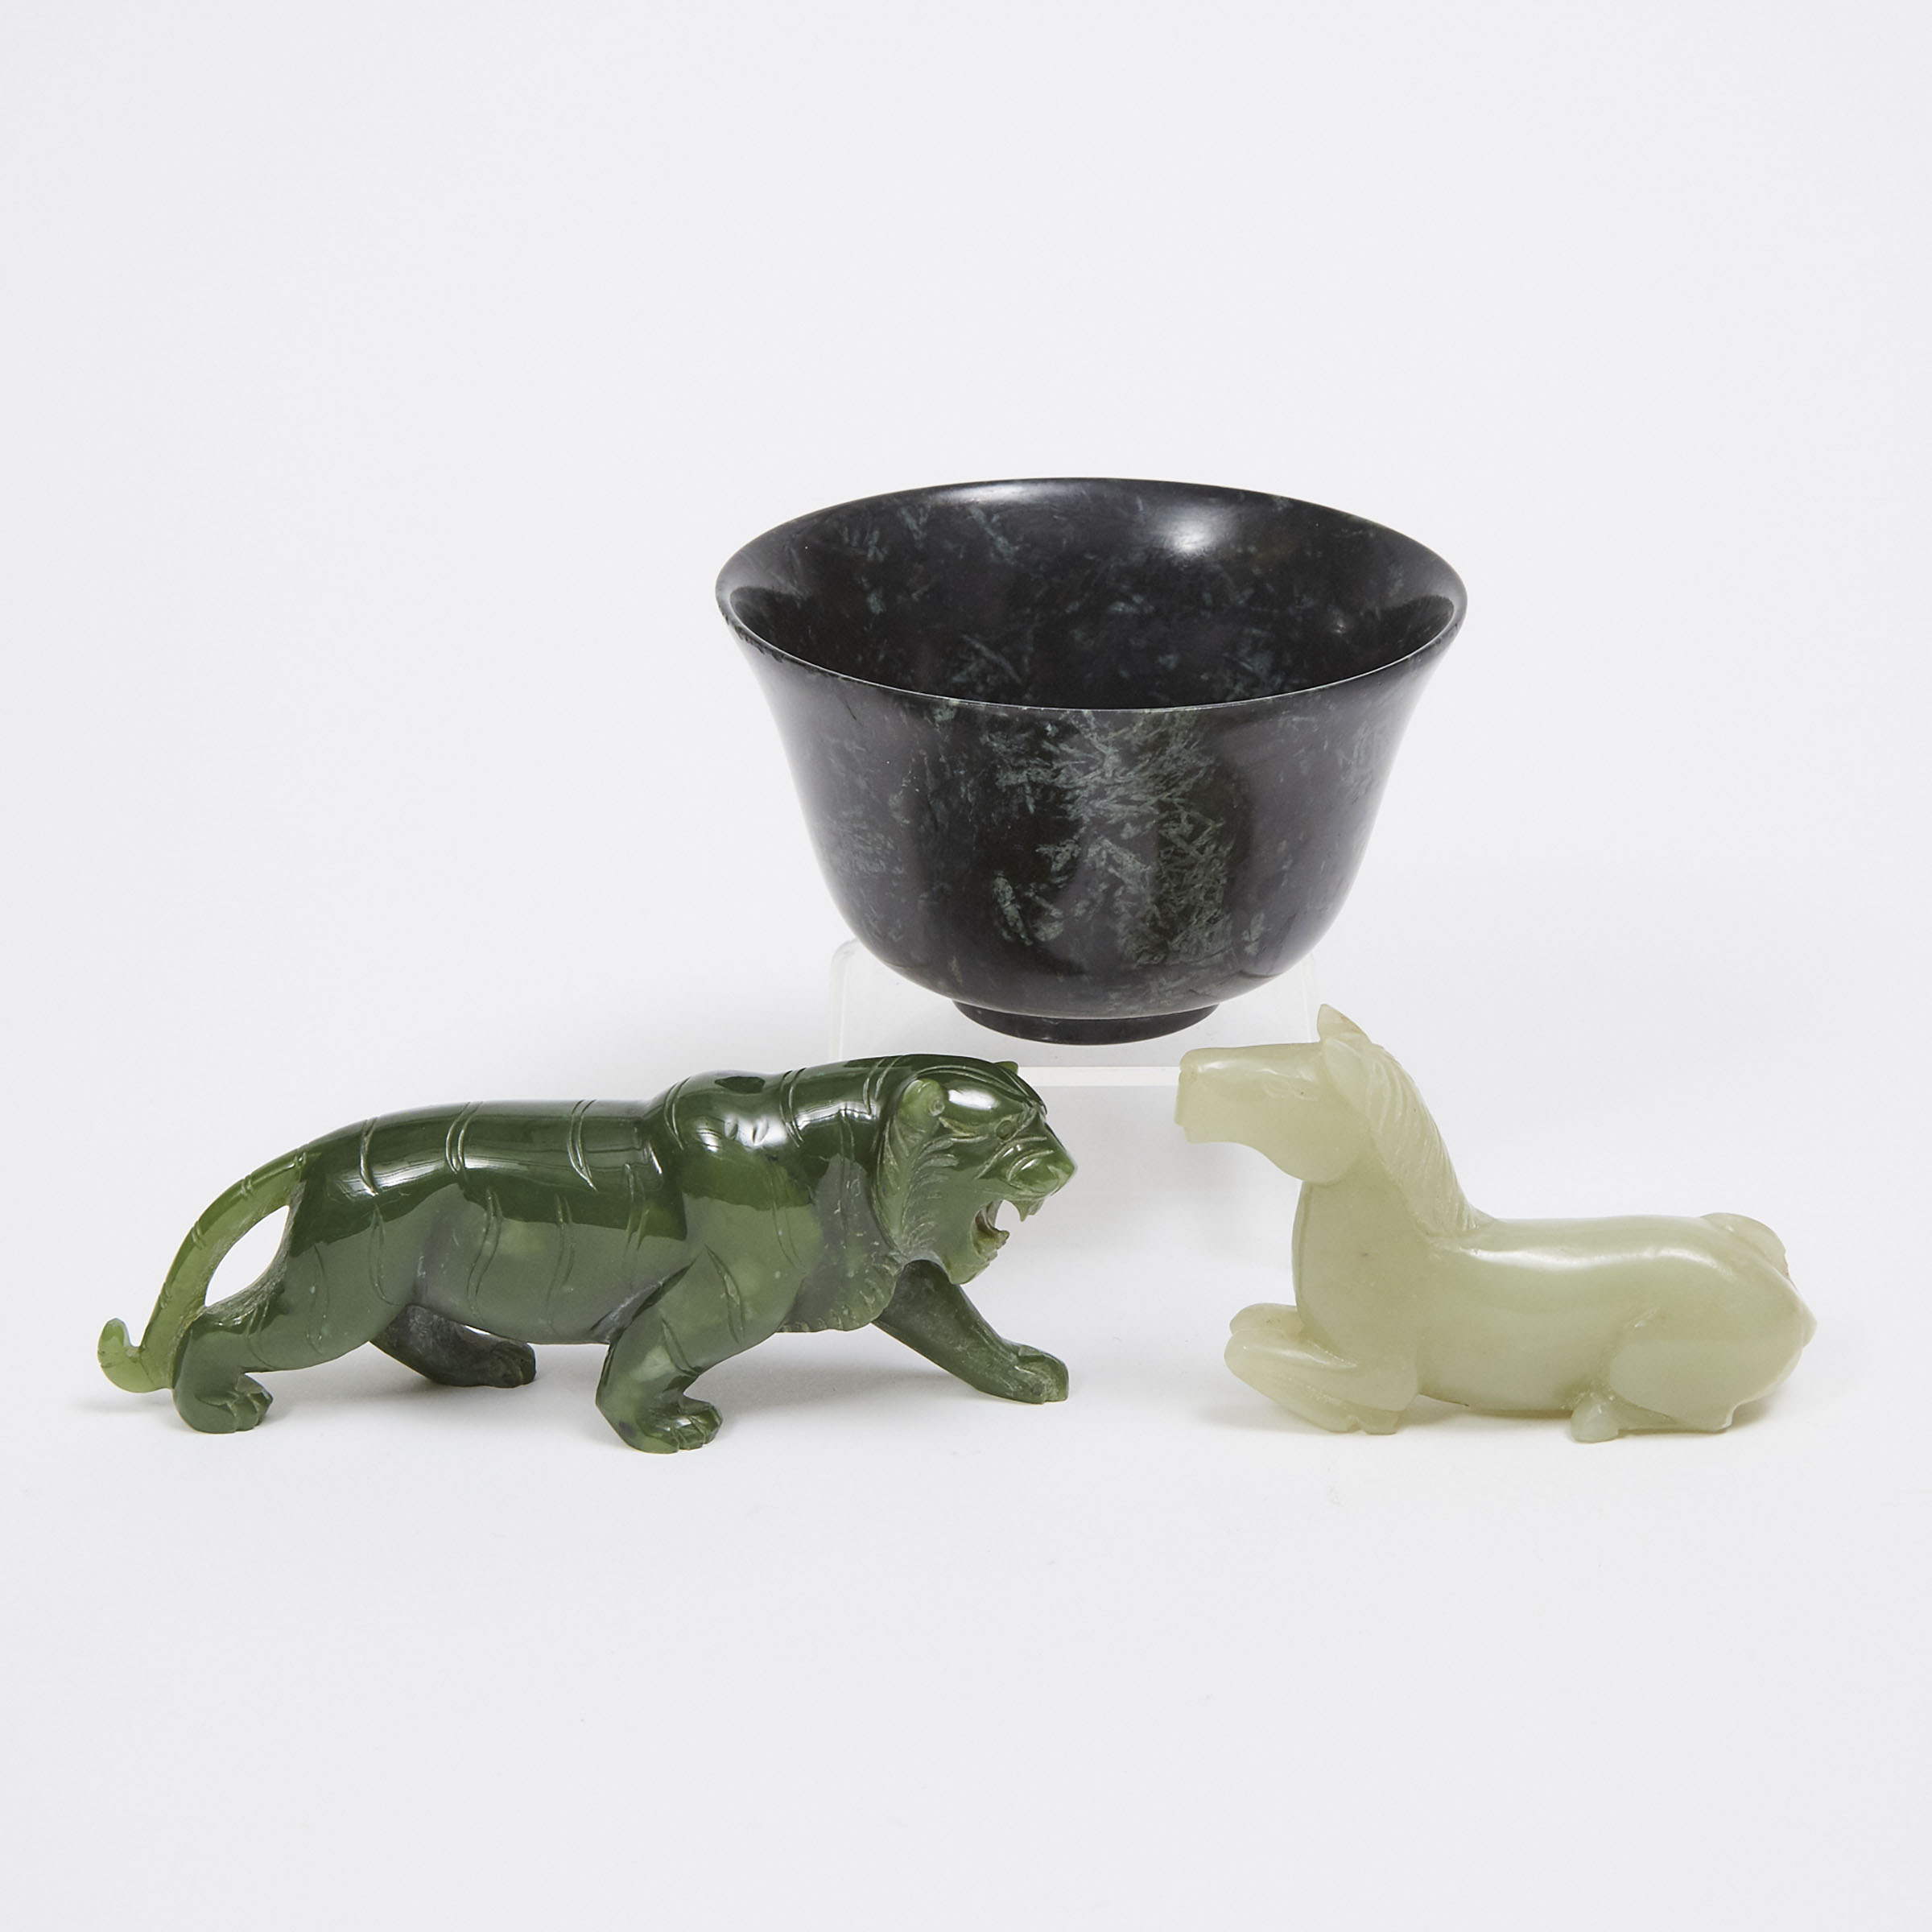 A Group of Three Jade and Hardstone Carvings